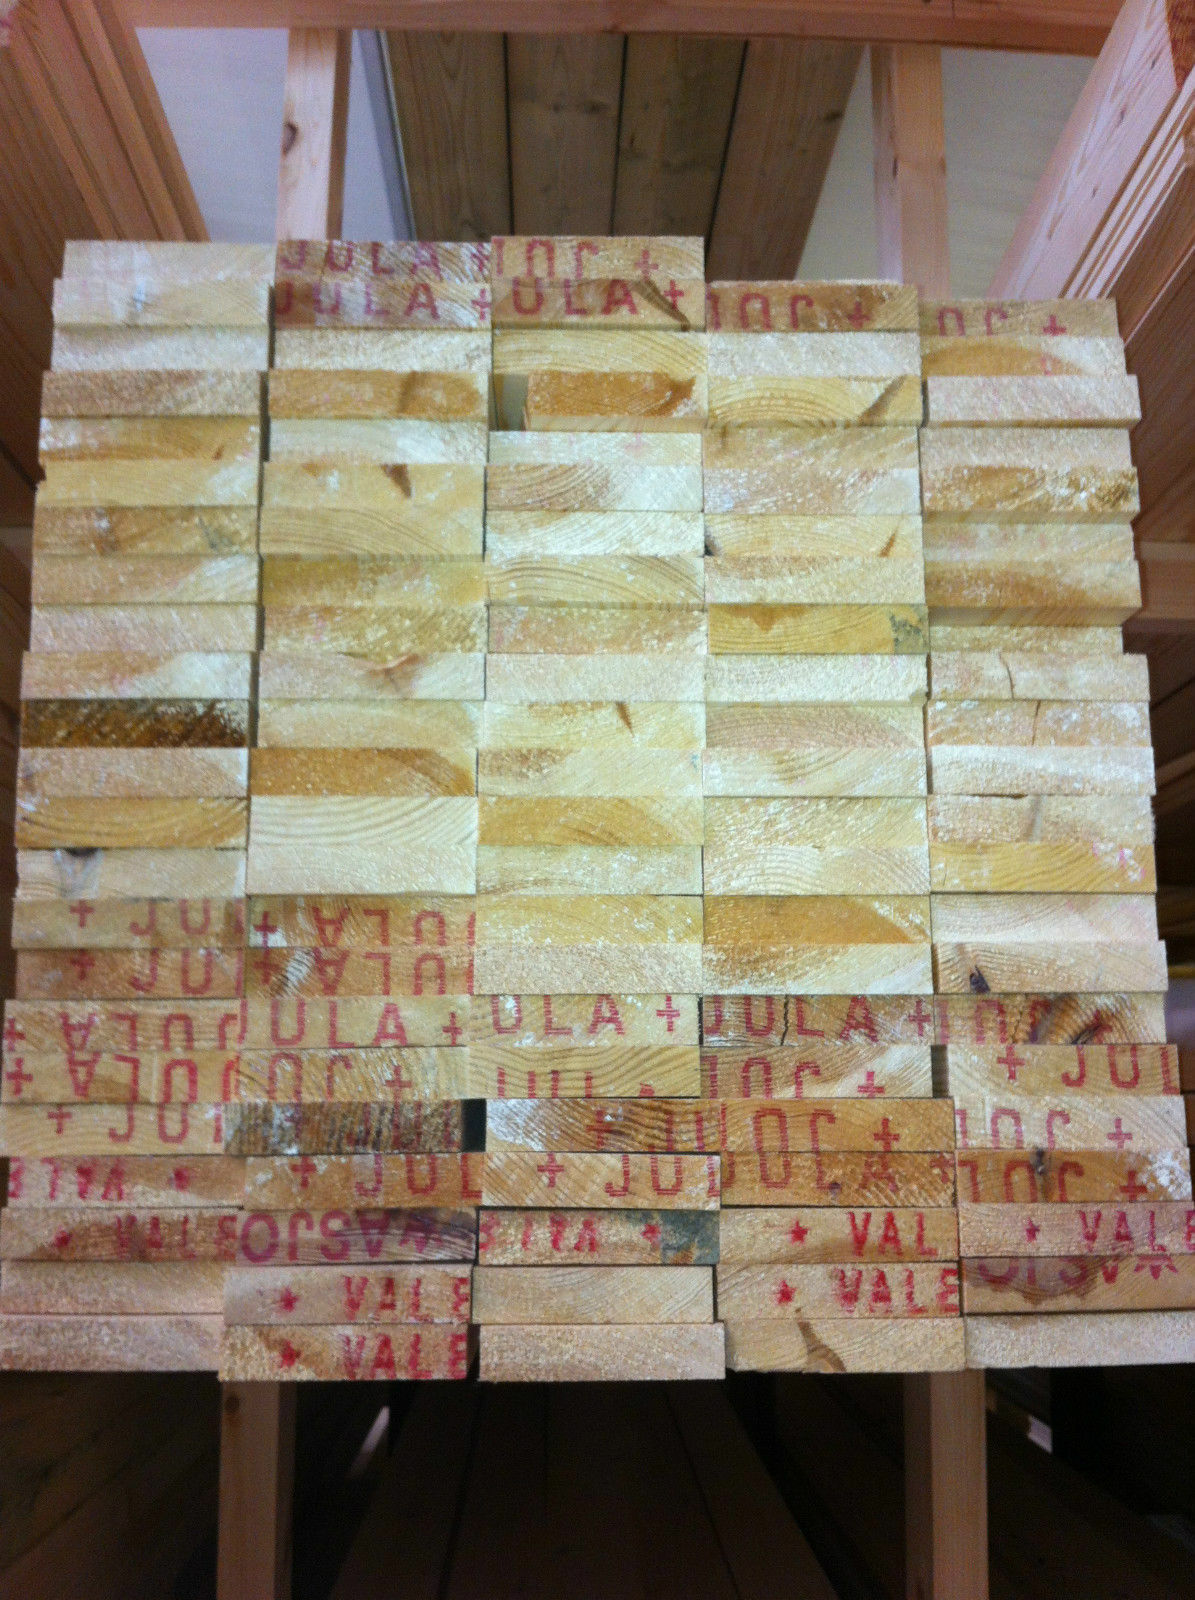 4x1 PSE PLANED PINE TIMBER (94x20) ONLY £1.75 PER METER INC VAT!